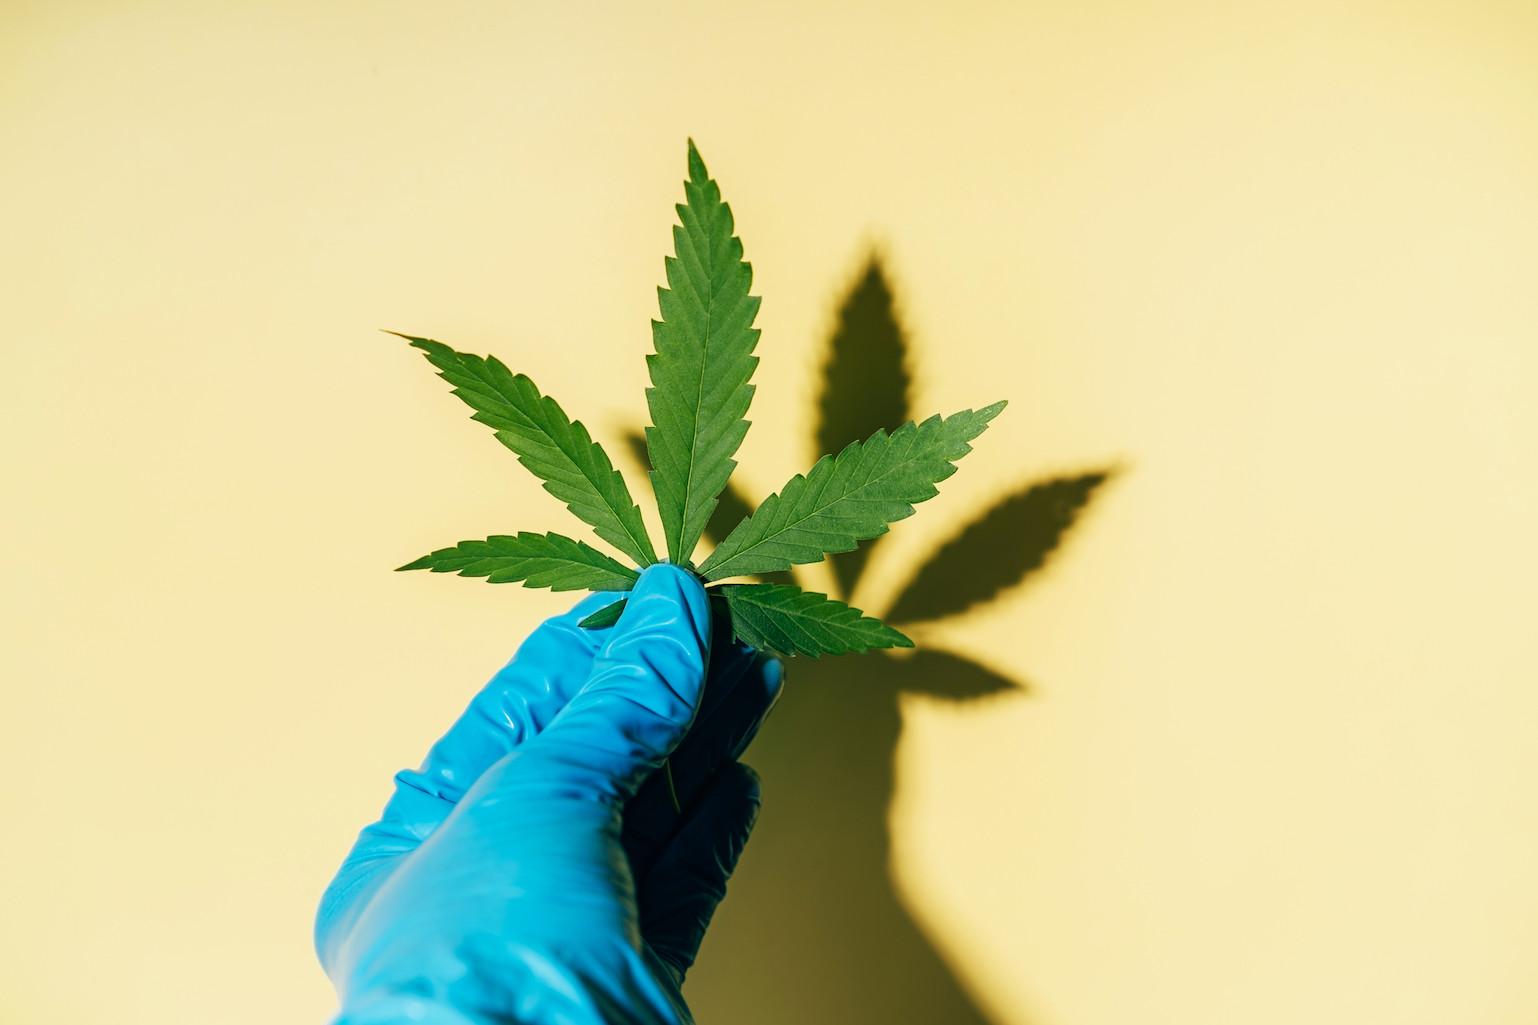 A cannabis leaf is held up by a hand in a blue surgical glove.